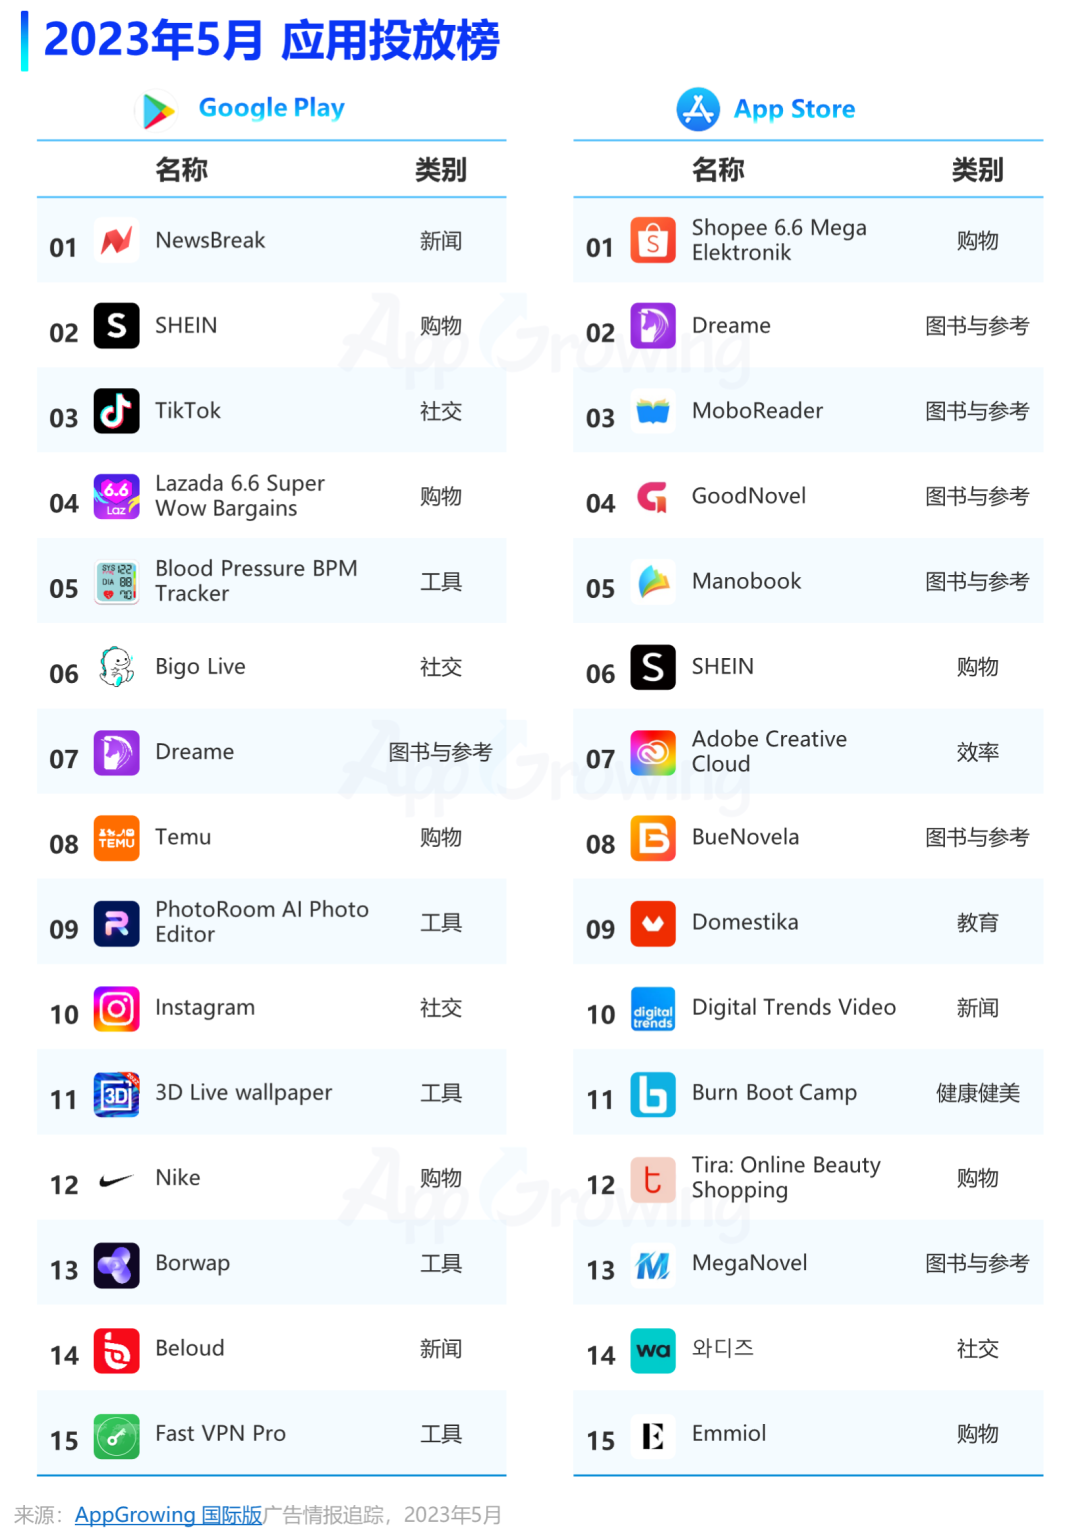 2023 May most advertised apps